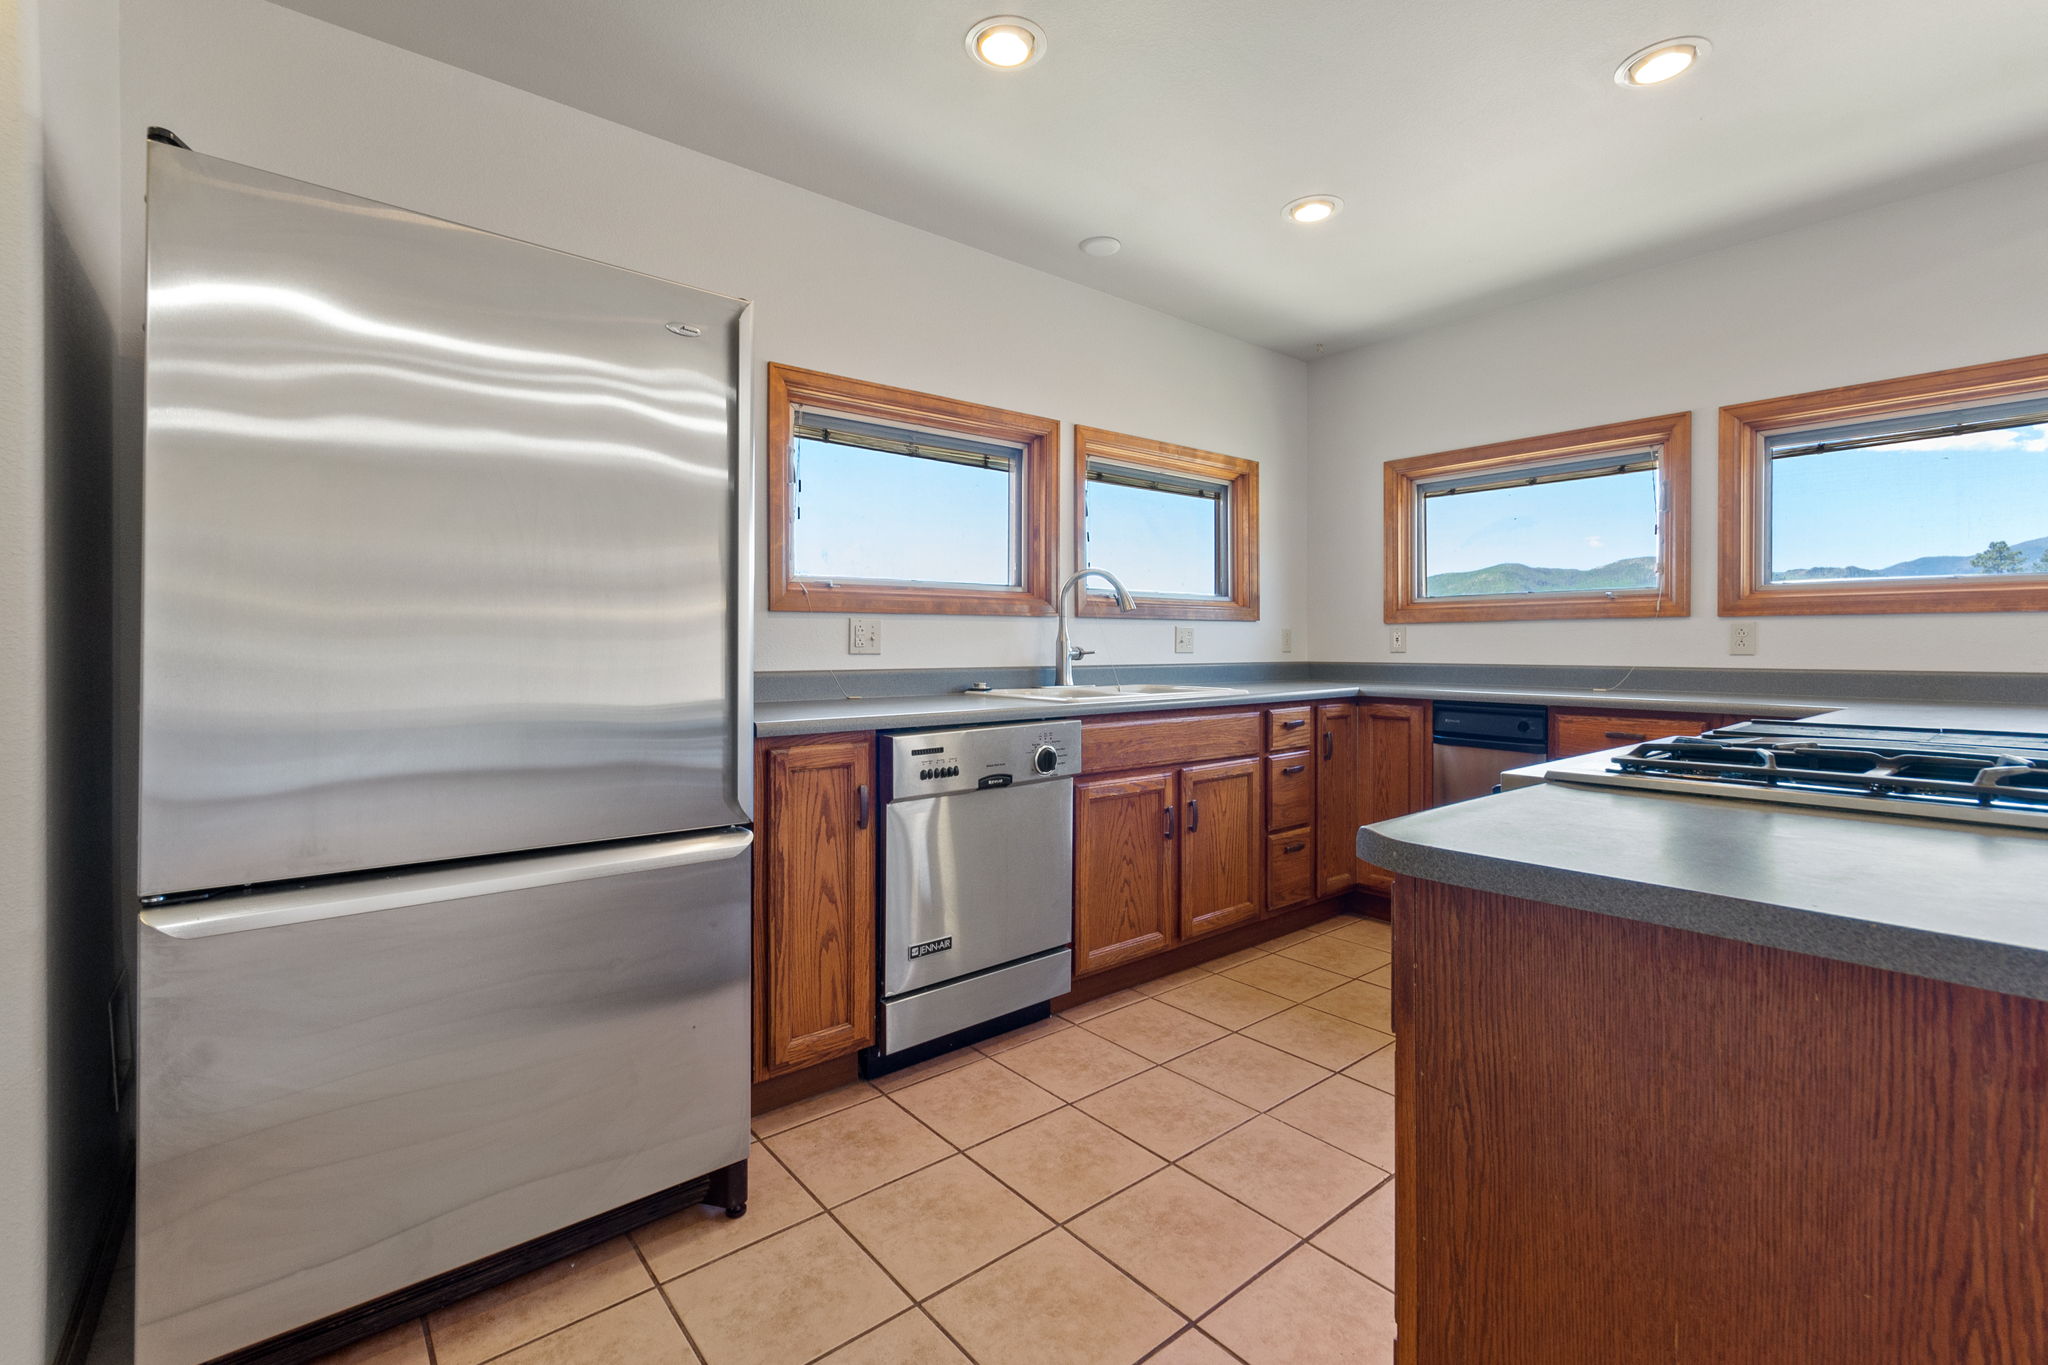  460 Co Rd 290, Florence, CO 81226, US Photo 11